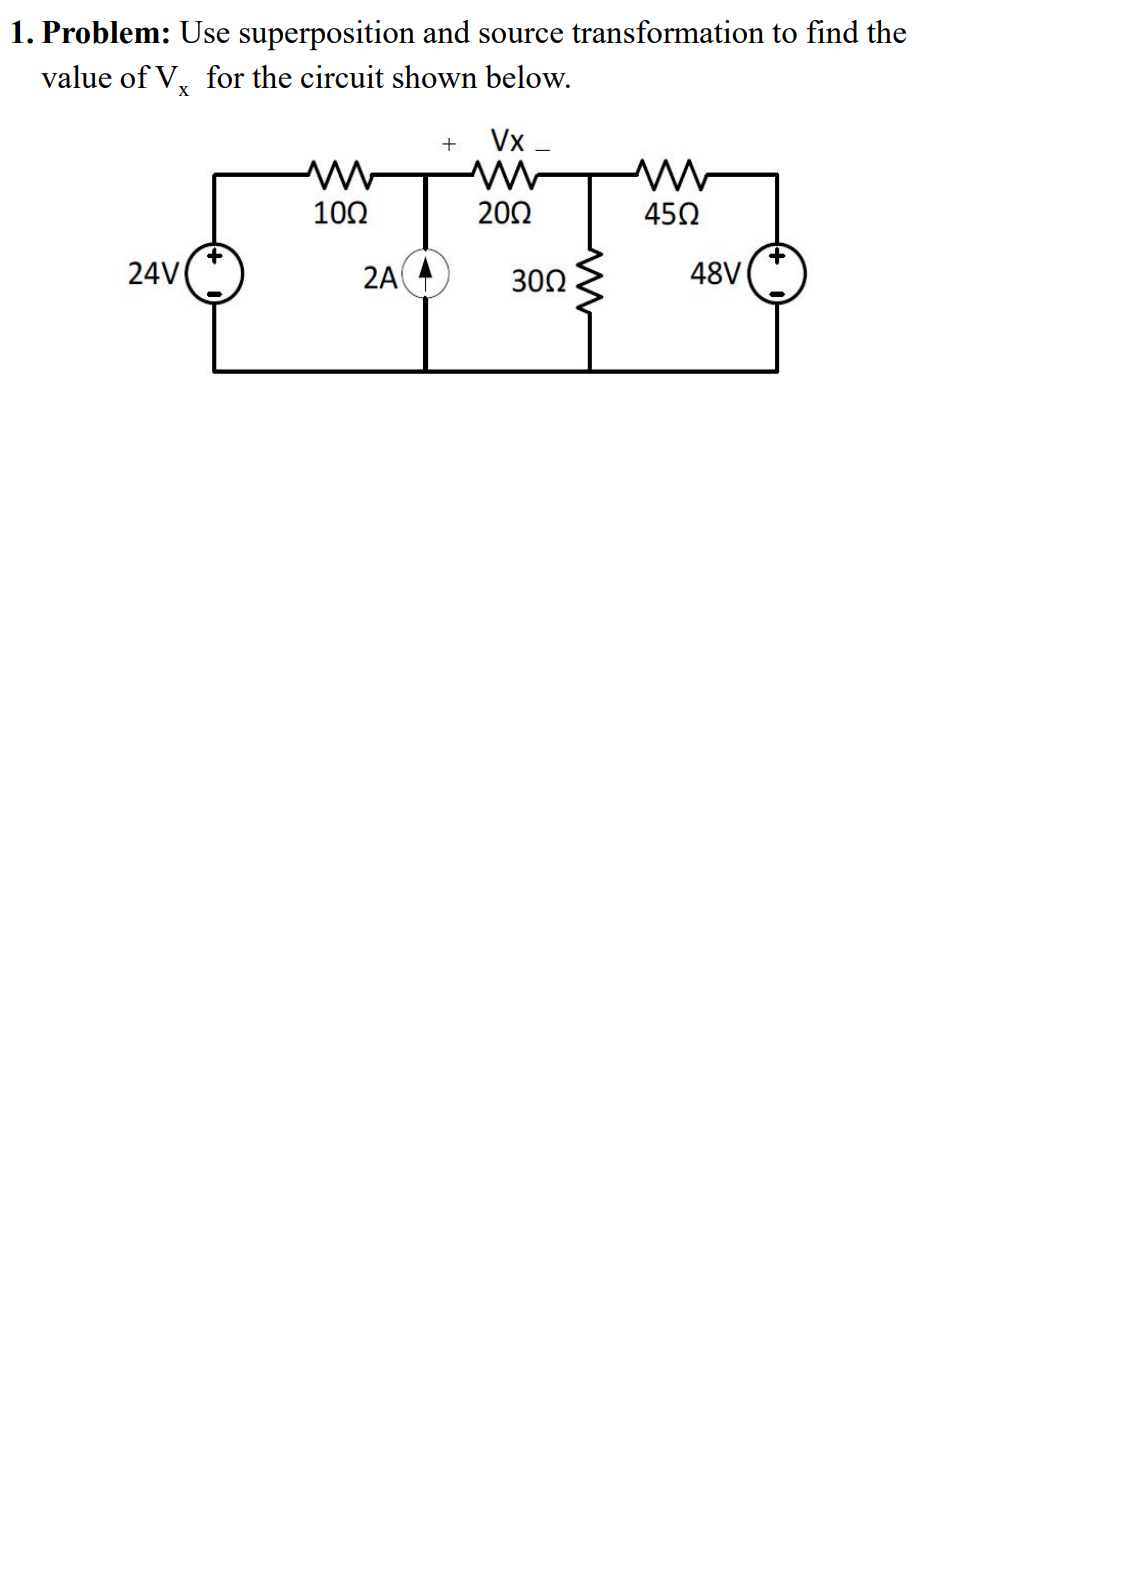 1. Problem: Use superposition and source transformation to find the
value of V, for the circuit shown below.
Vx .
100
202
450
24V
2A
300
48V
